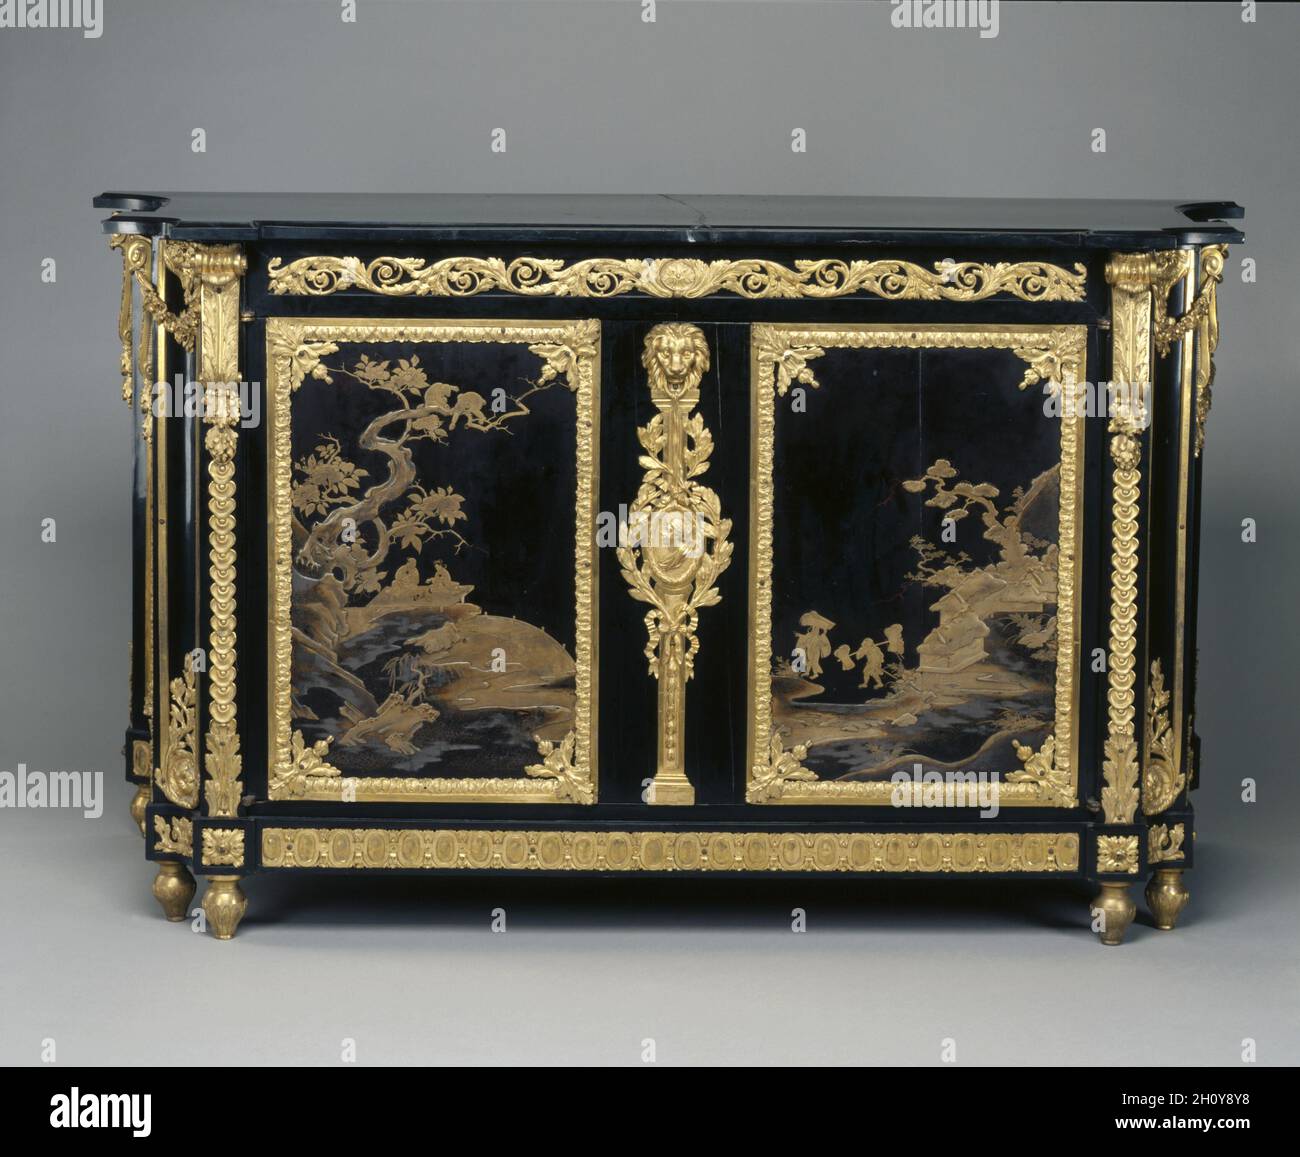 Chest of Drawers (Commode), c. 1765- 1770. René Dubois (French, 1737-1798). Ebony veneer with Japanese lacquer panels, gilt bronze mounts, and marble top; overall: 86.8 x 152.4 x 59.7 cm (34 3/16 x 60 x 23 1/2 in.). Stock Photo